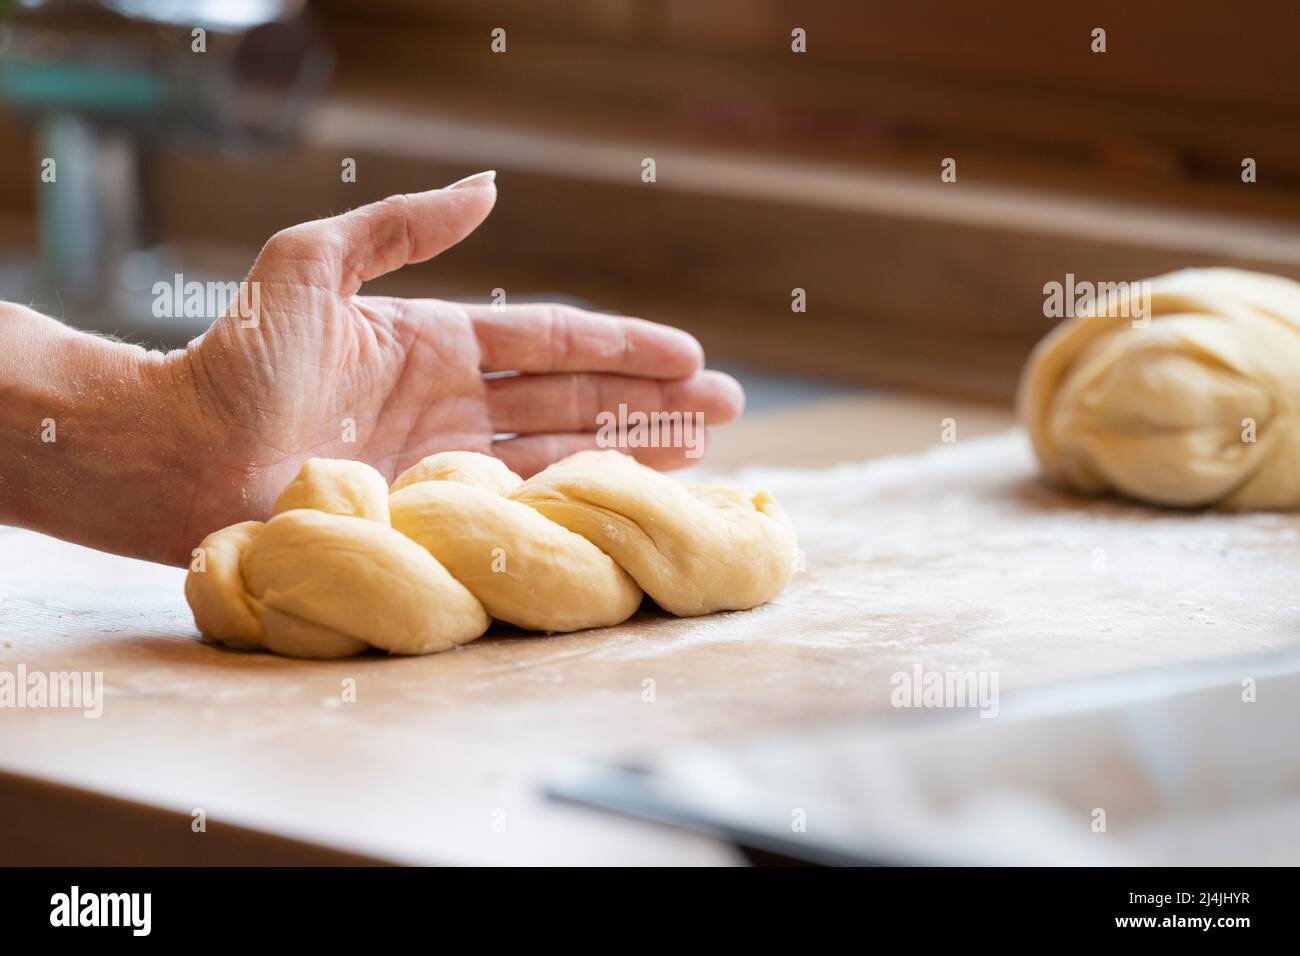 Lady's hand forms a handmade easter braid in the kitchen from sweet yeast dough Stock Photo